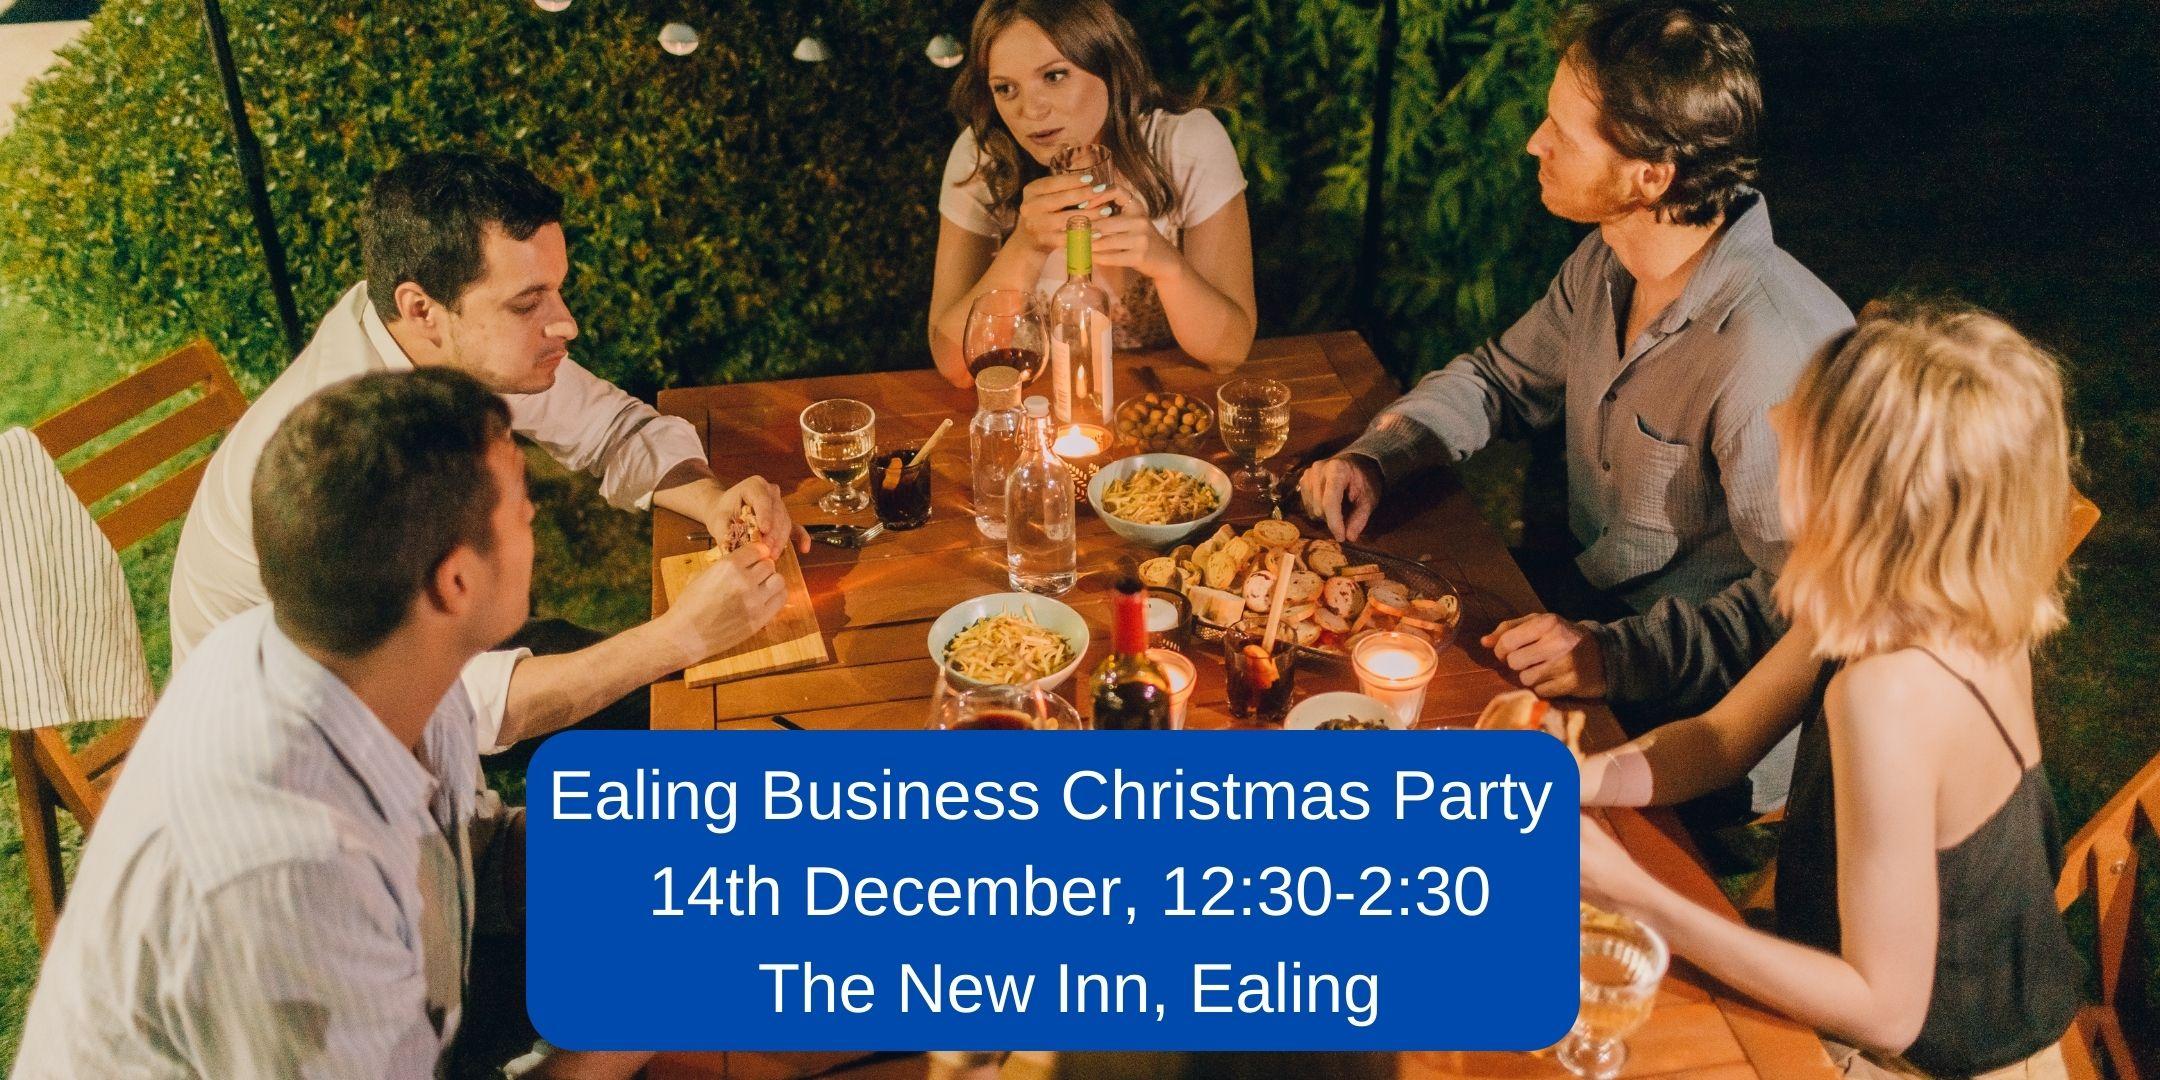 Ealing Business Network Christmas Party - Lunchtime social and networking 1